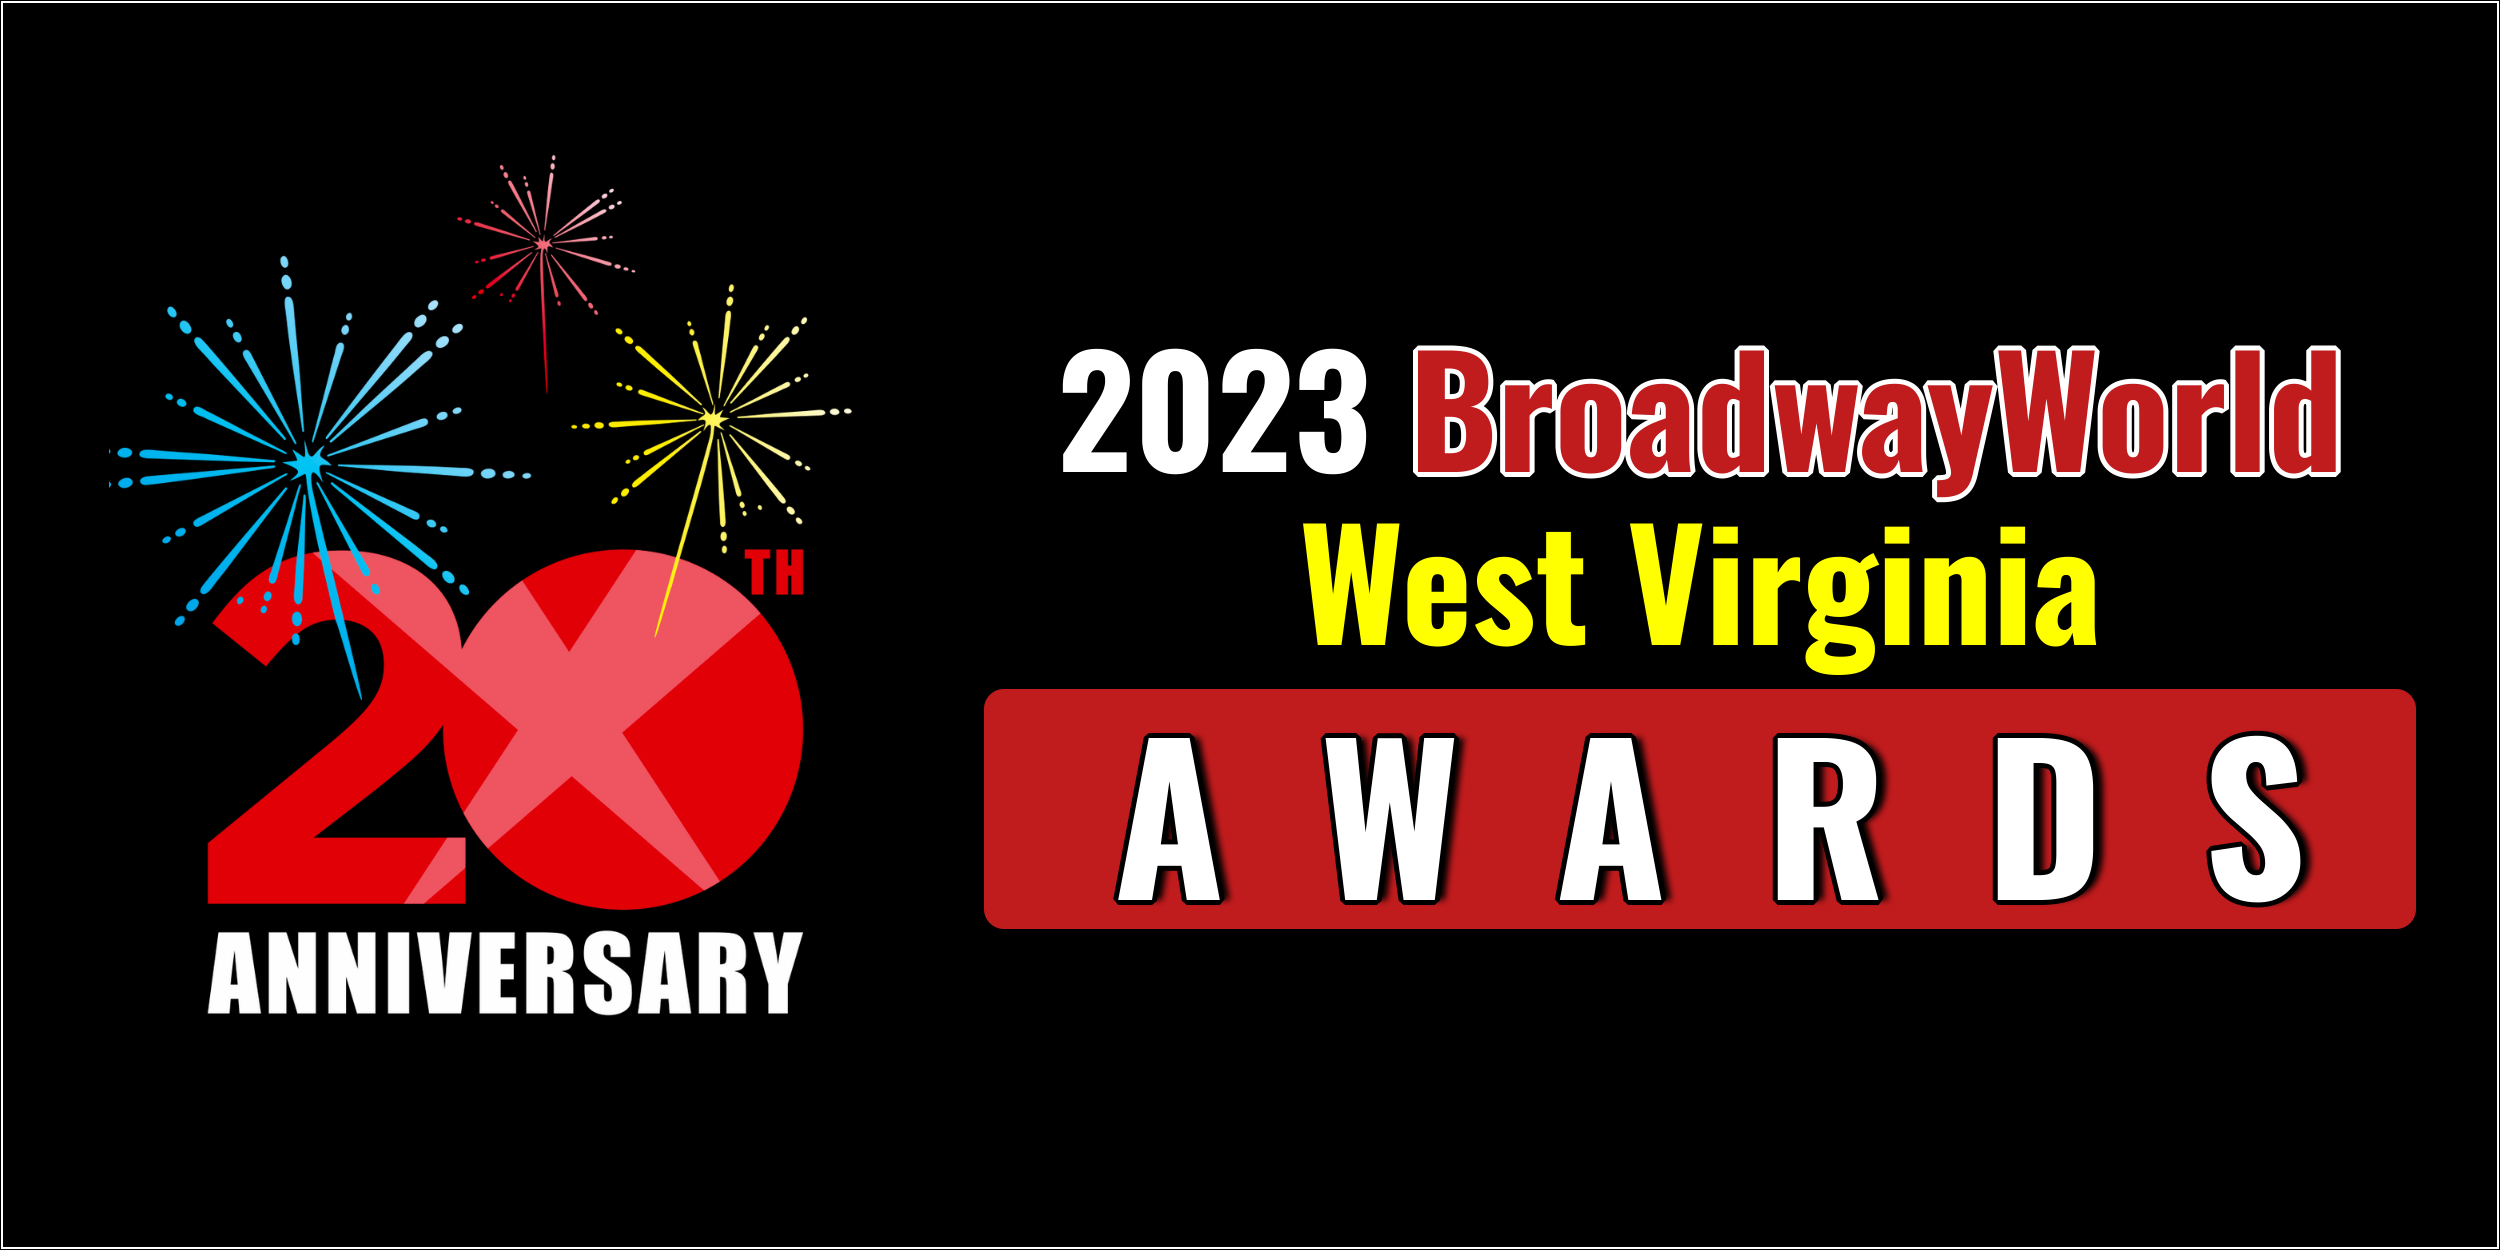 Latest Standings Announced For The 2023 BroadwayWorld West Virginia Awards; THE WIZARD OF OZ Leads Best Musical! 